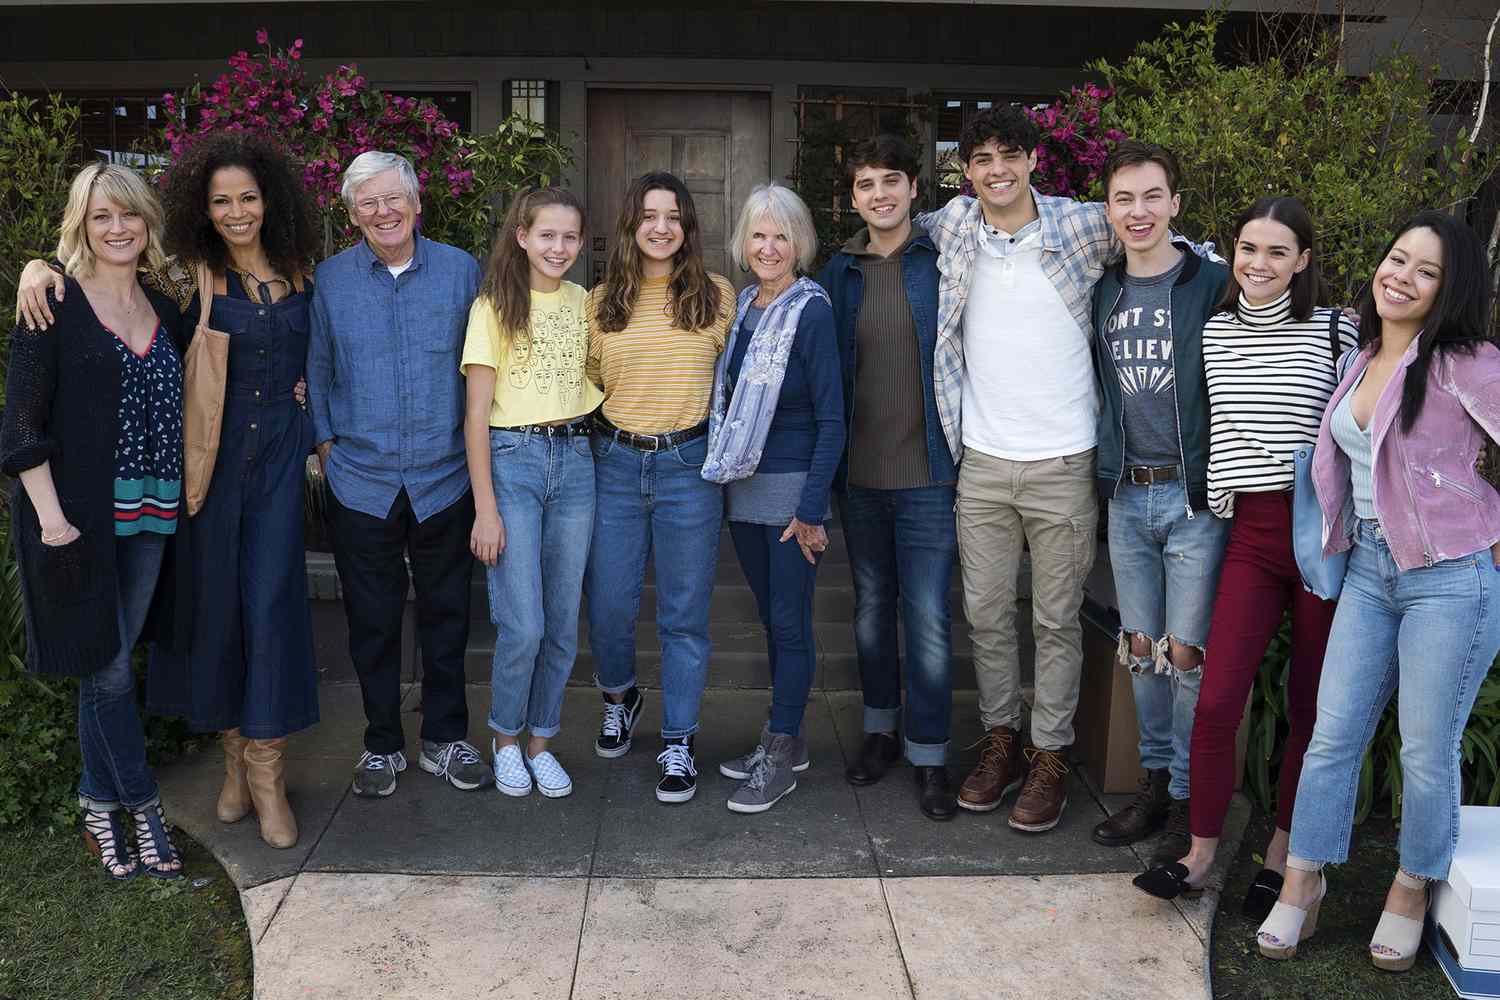 The Fosters: Meet the Family!